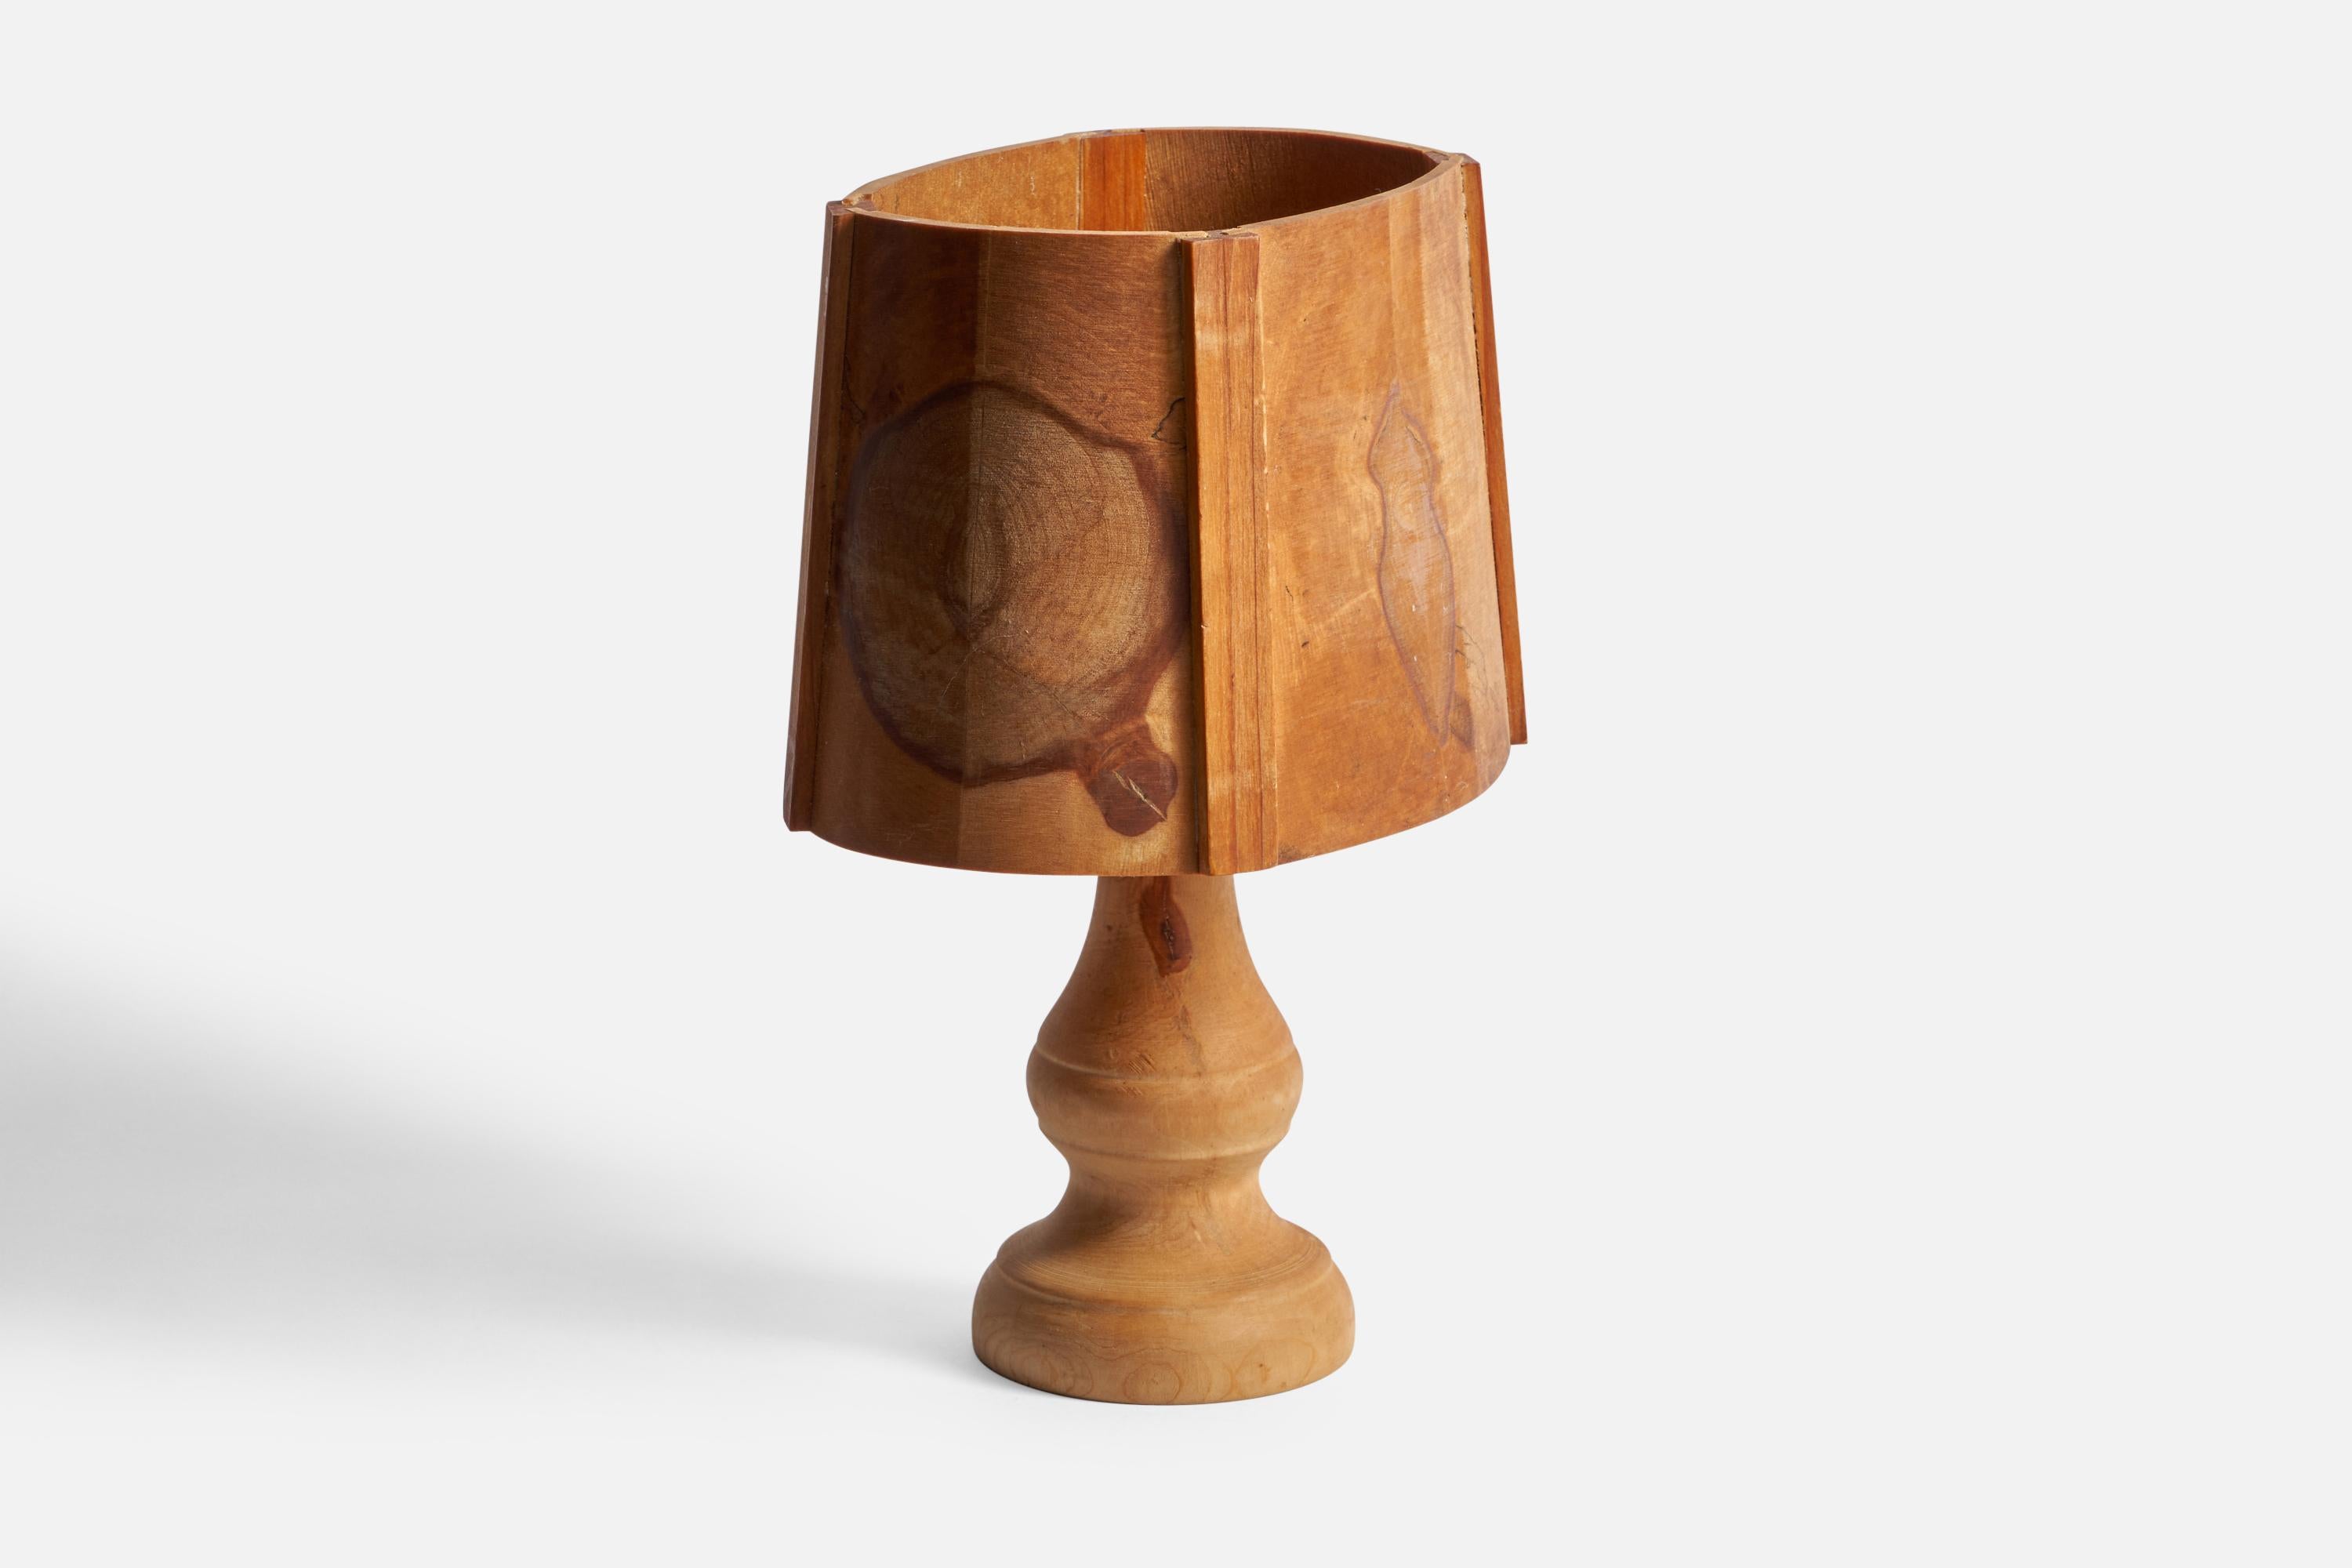 A wood table lamp designed and produced in Sweden, 1970s.

Overall Dimensions (inches): 11.25” H x 8.25” W x 6.25” D
Bulb Specifications: E-26 Bulb
Number of Sockets: 1
All lighting will be converted for US usage. We are unable to confirm that any